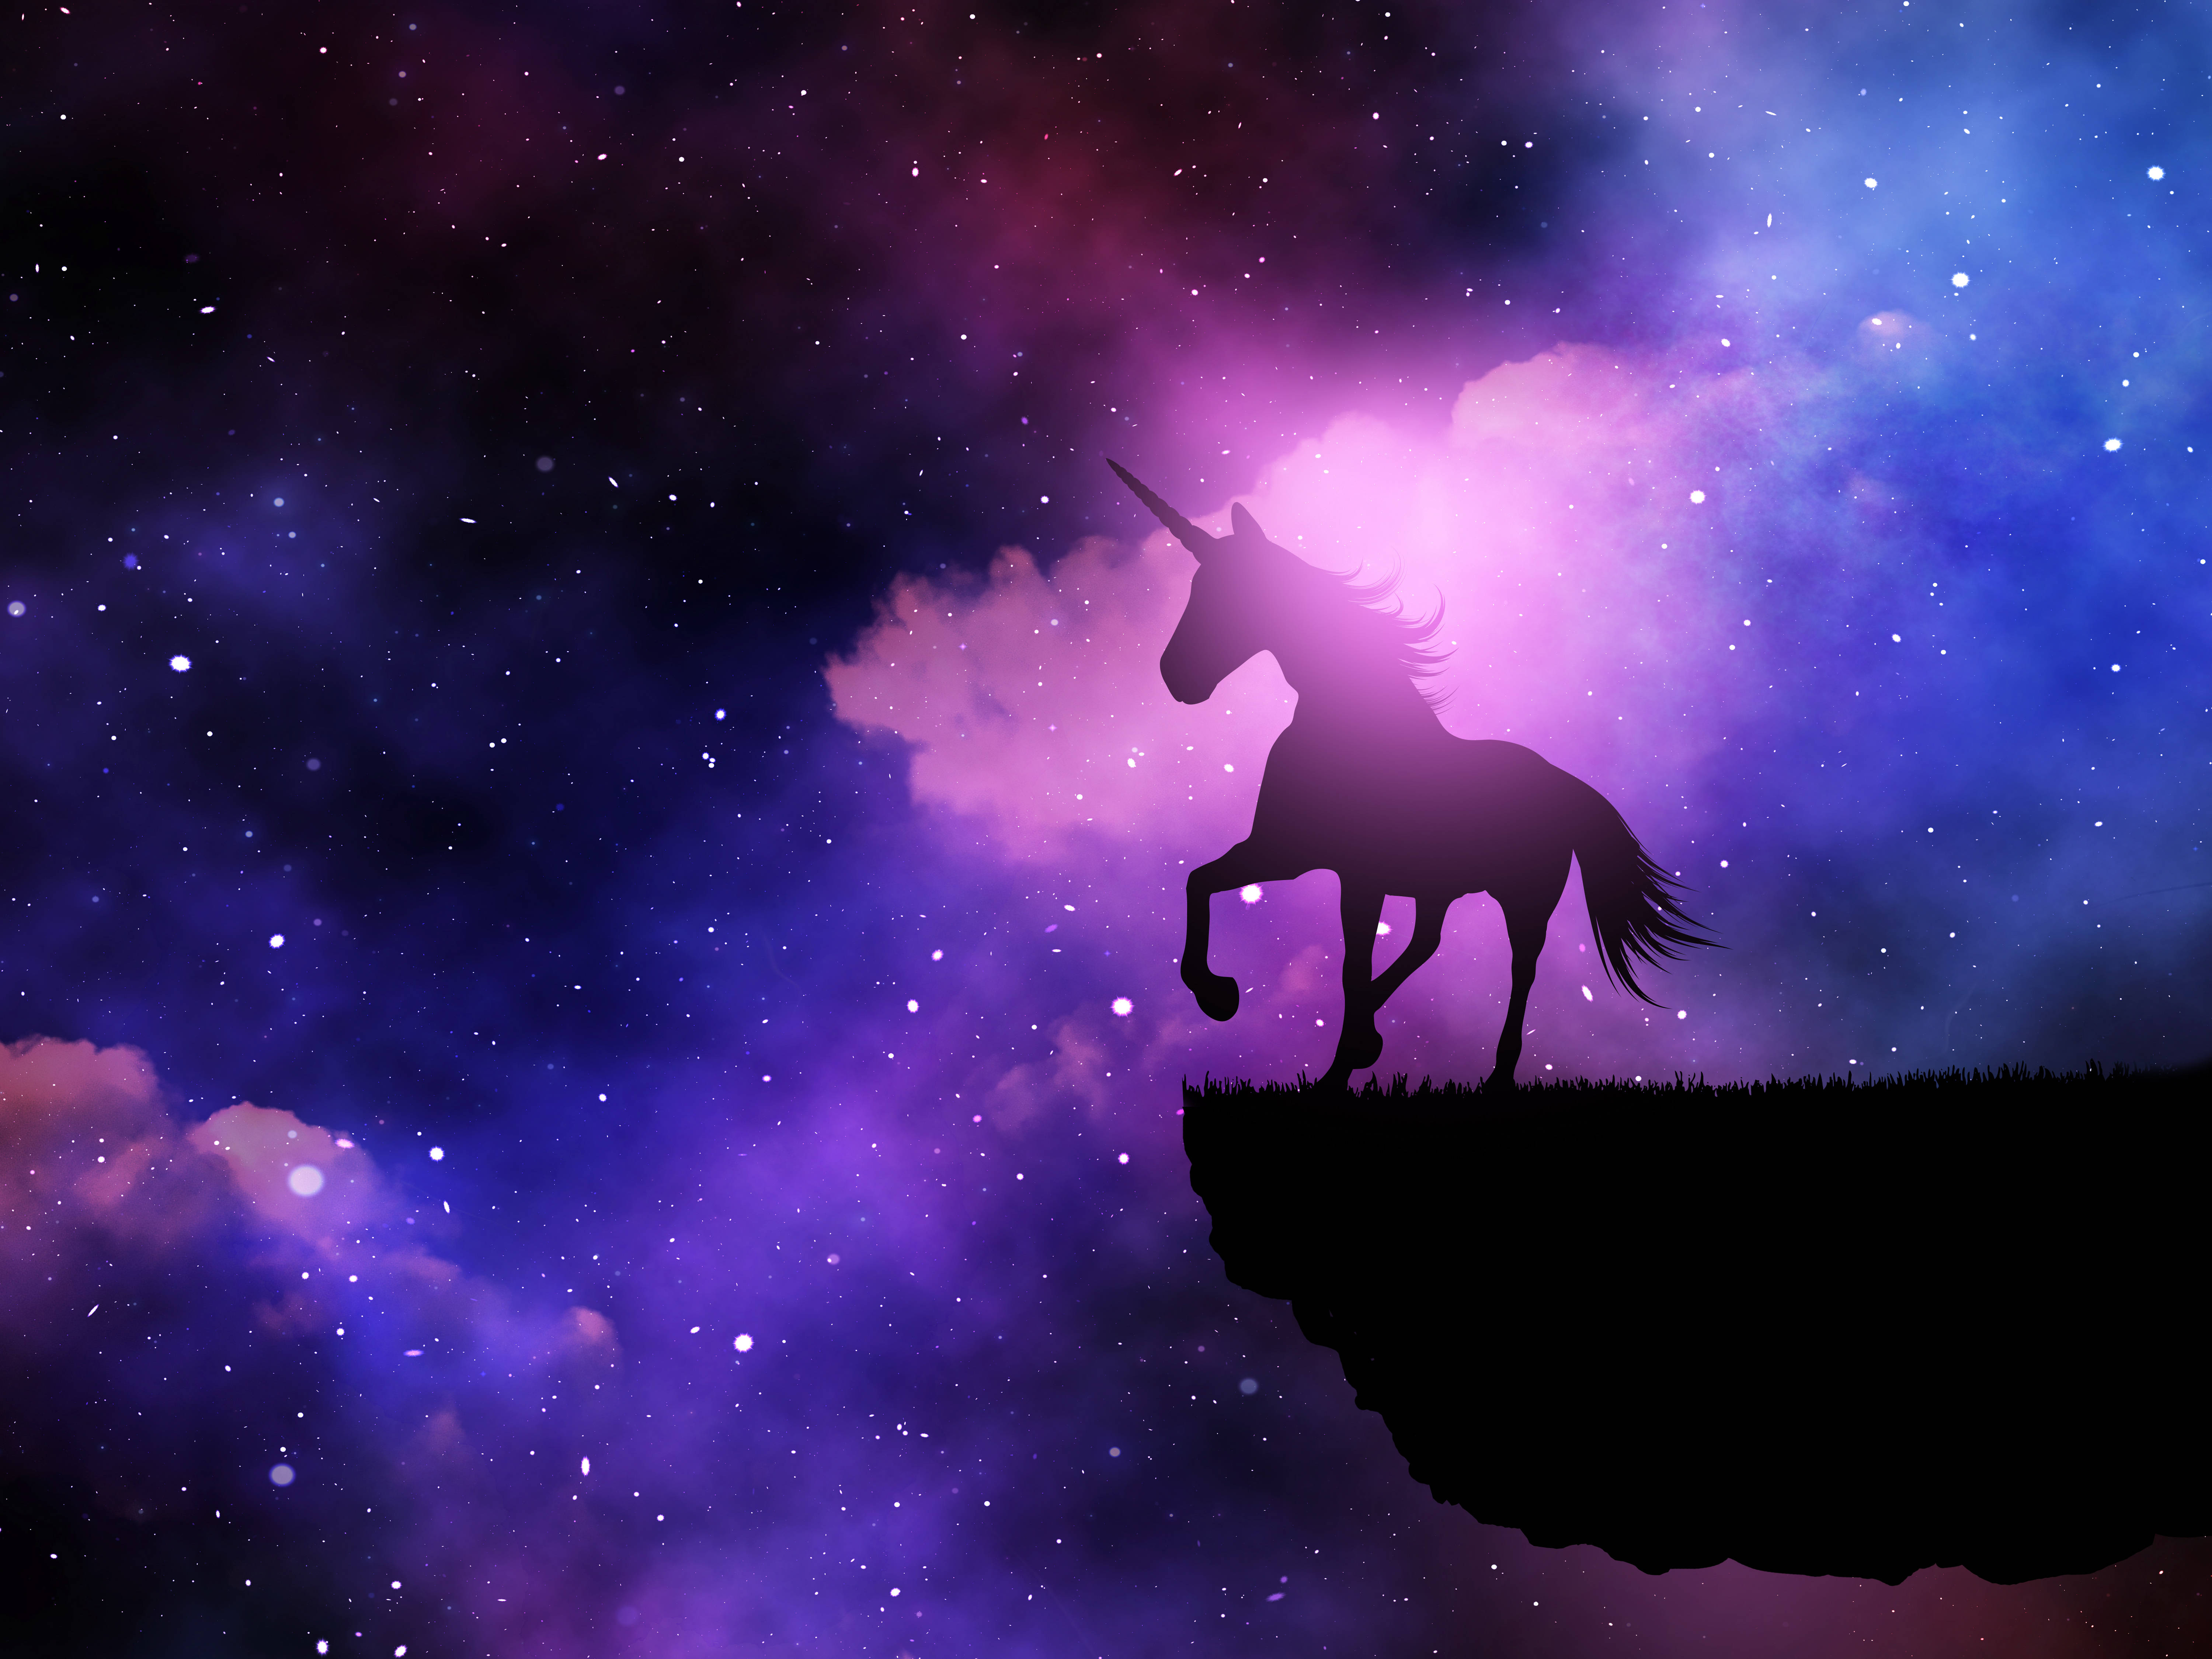 Download Space Galaxy Unicorn Silhouette Night Sky Wallpaper | Wallpapers .com